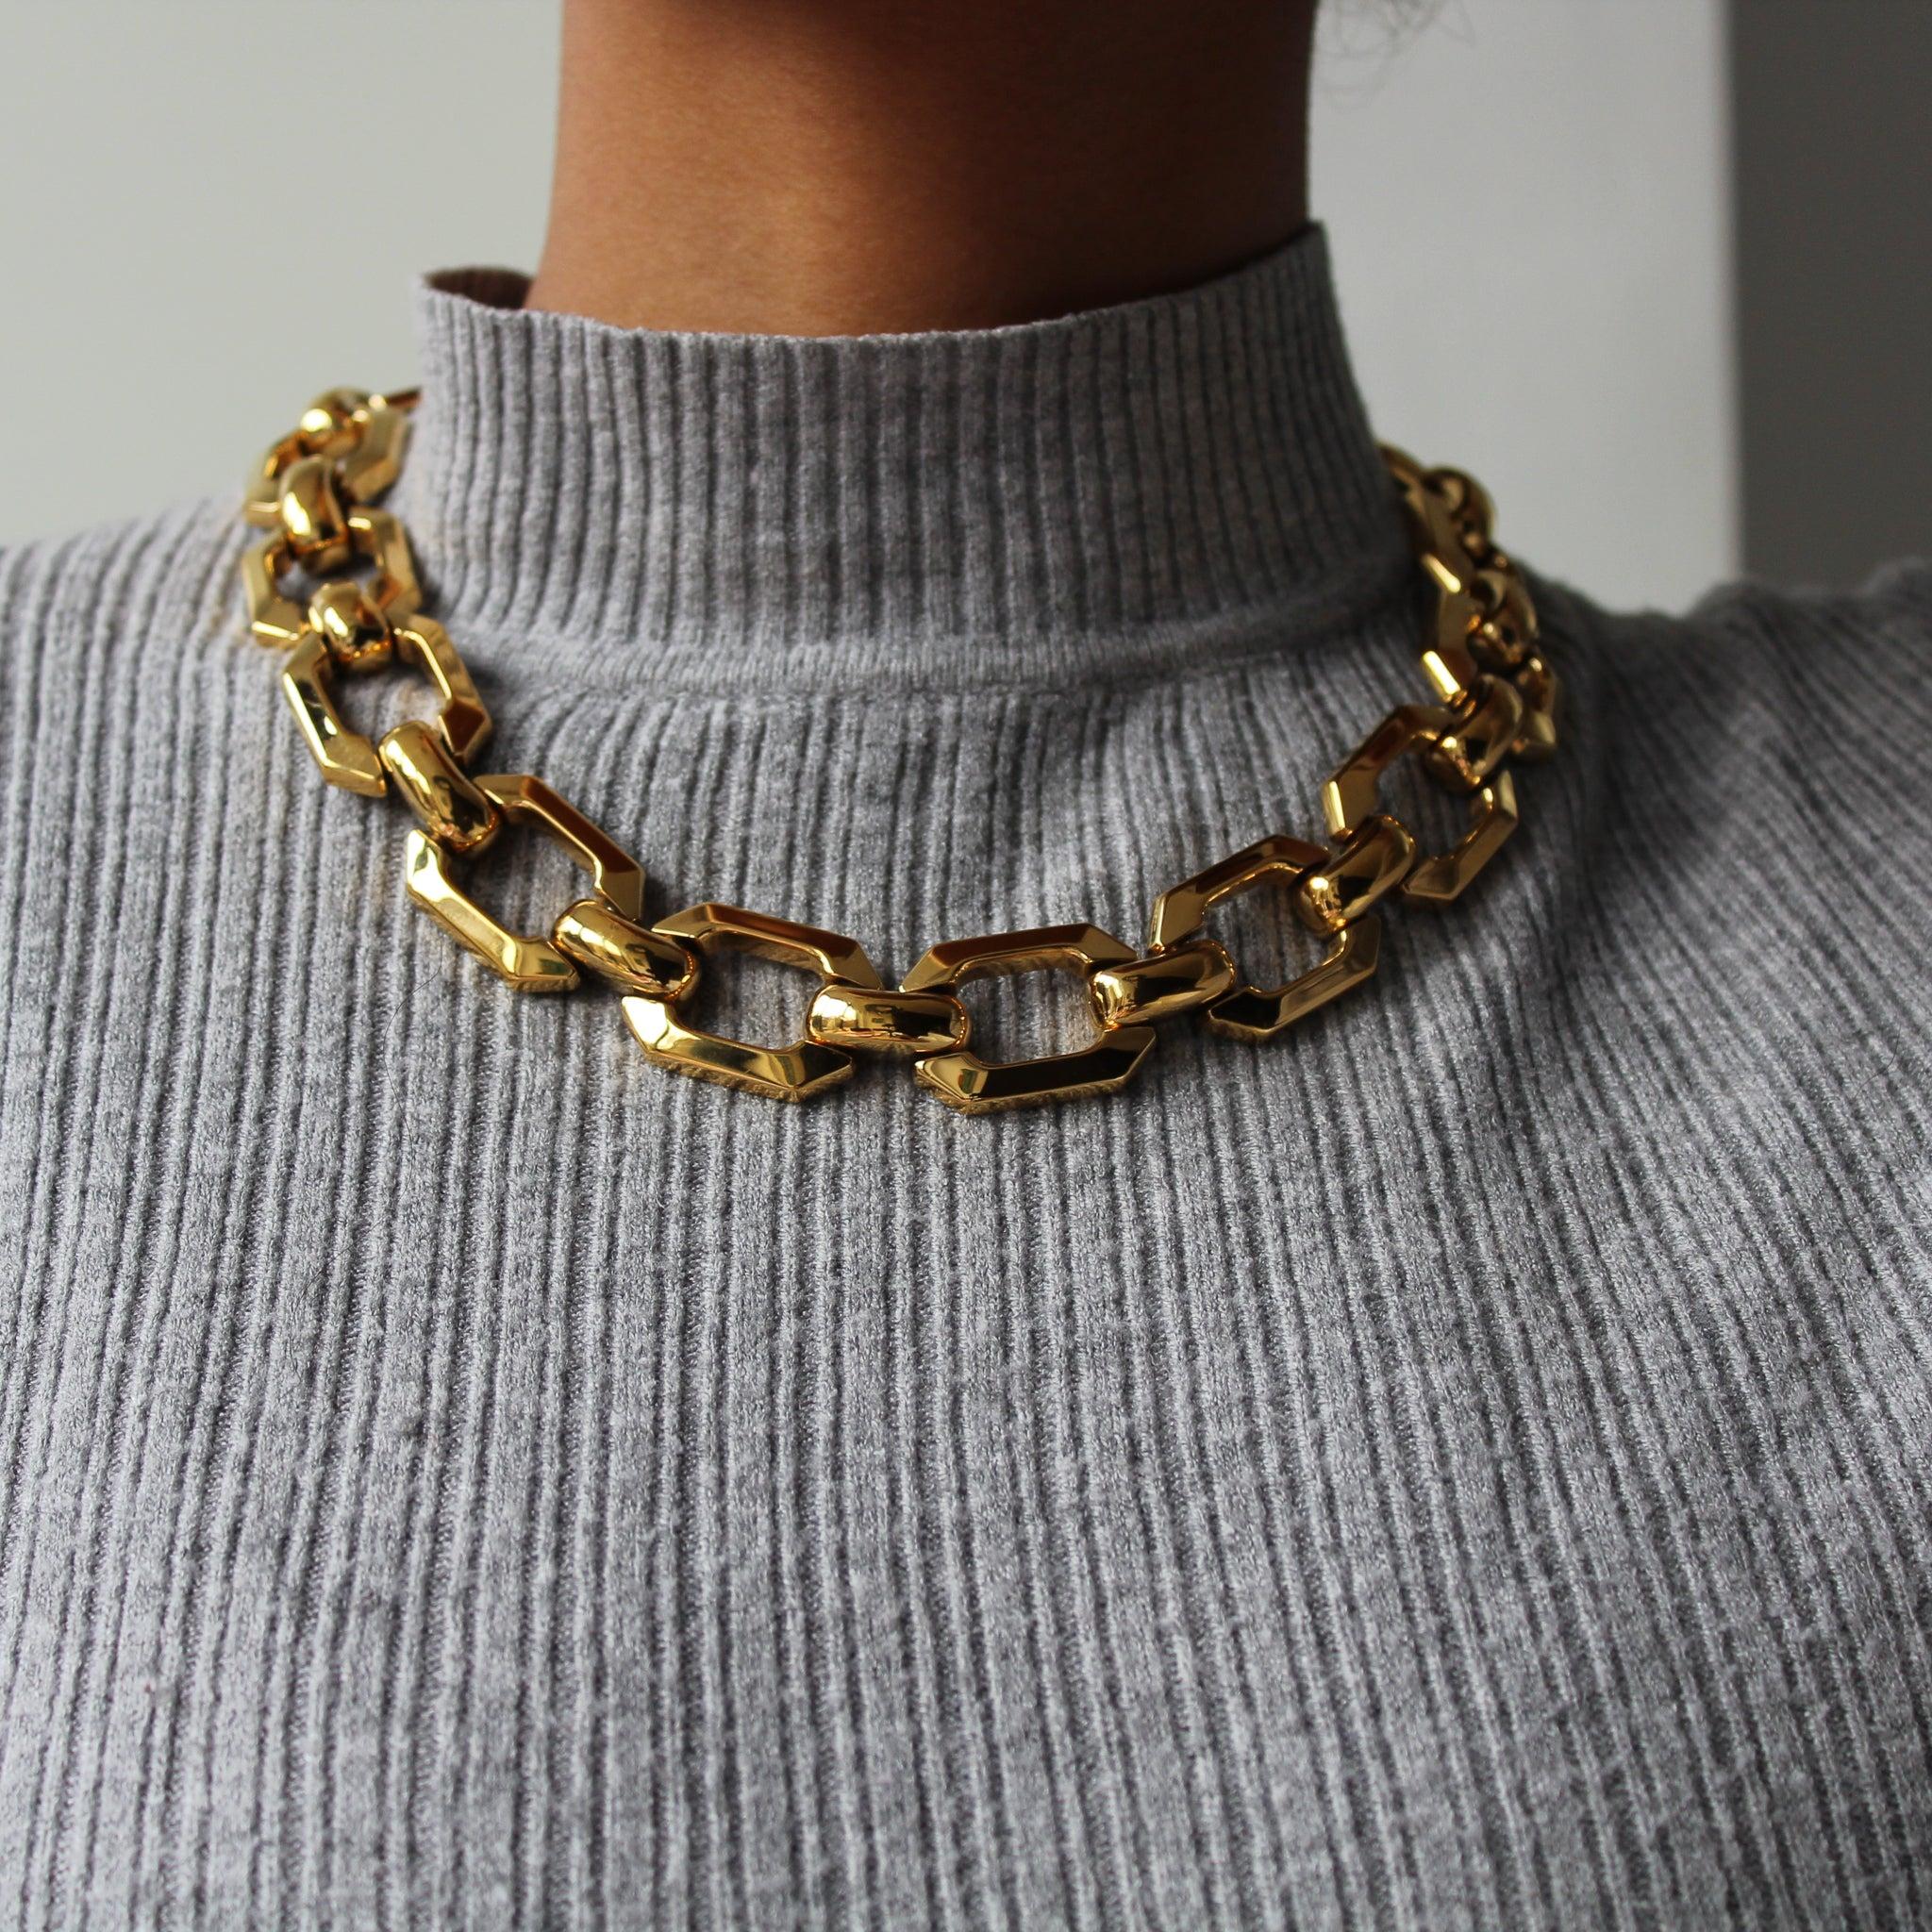 Christian Dior Vintage 1980s Necklace

Super cool chunky collar link necklace from the one of the world's most desirable designers. Crafted in Germany in the early 80s, this incredible necklace is cast from high quality gold plated metal hexagon